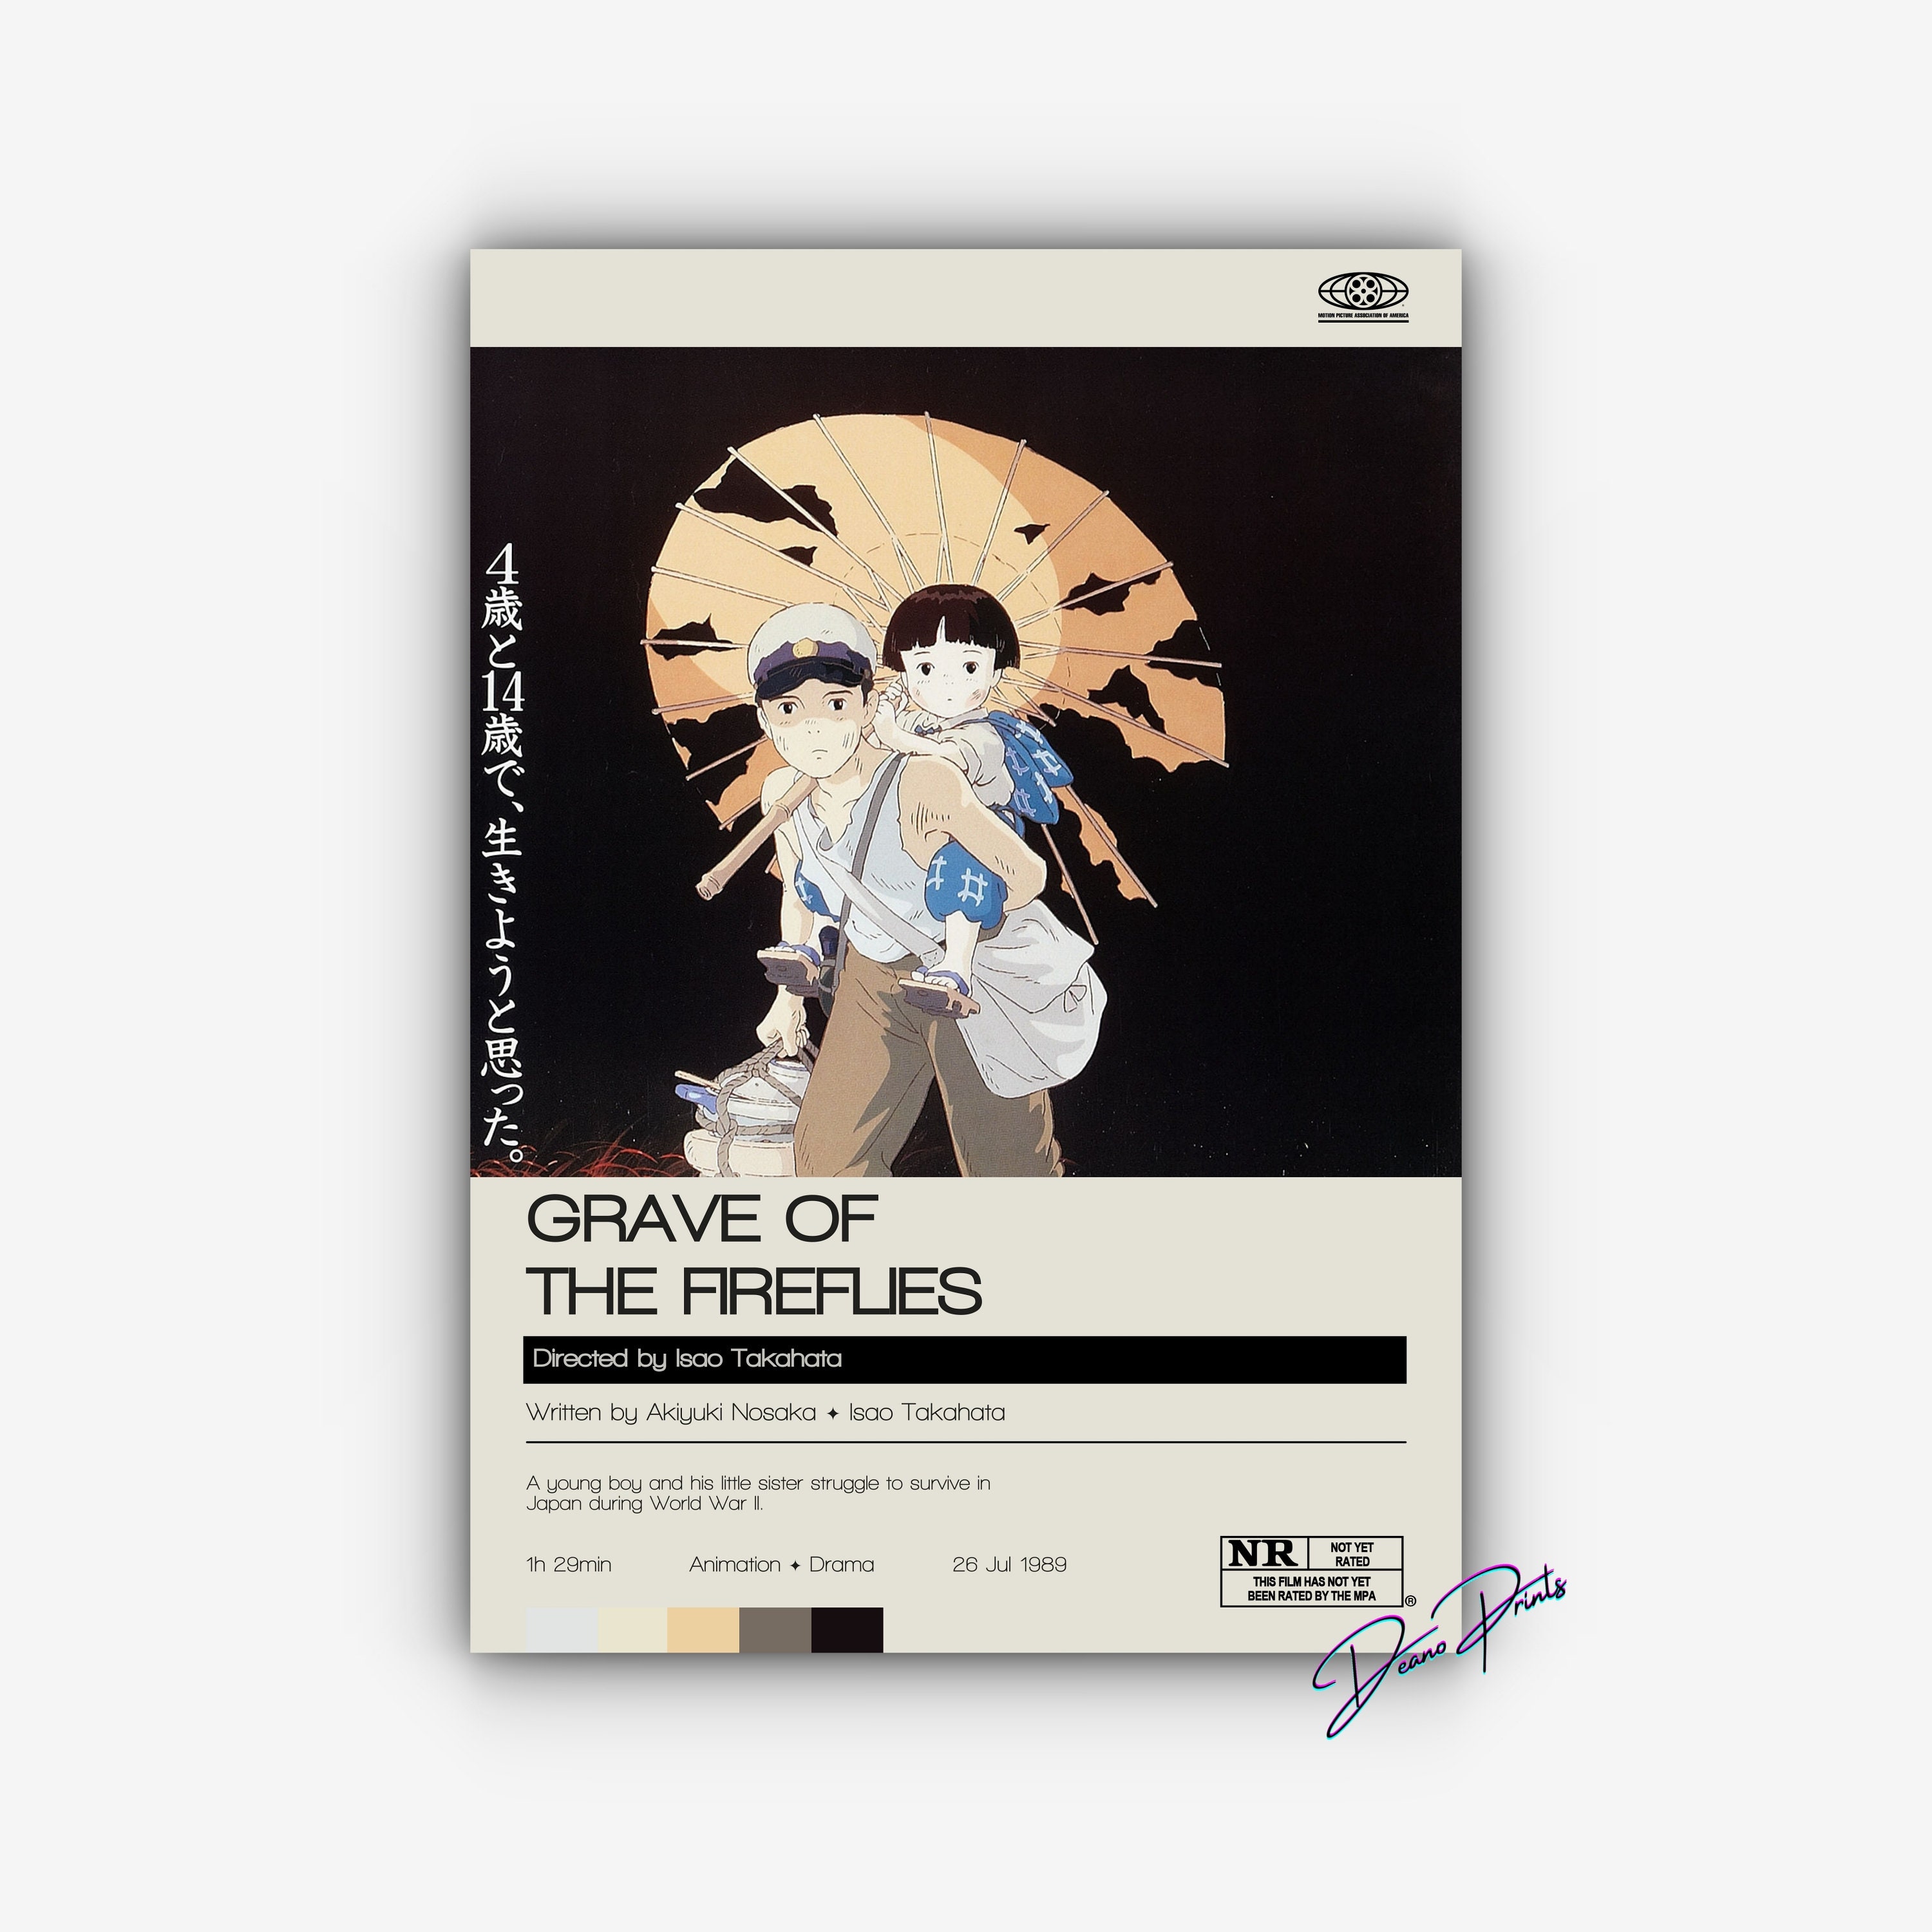 Grave of the Fireflies Minimalist Movie Posters